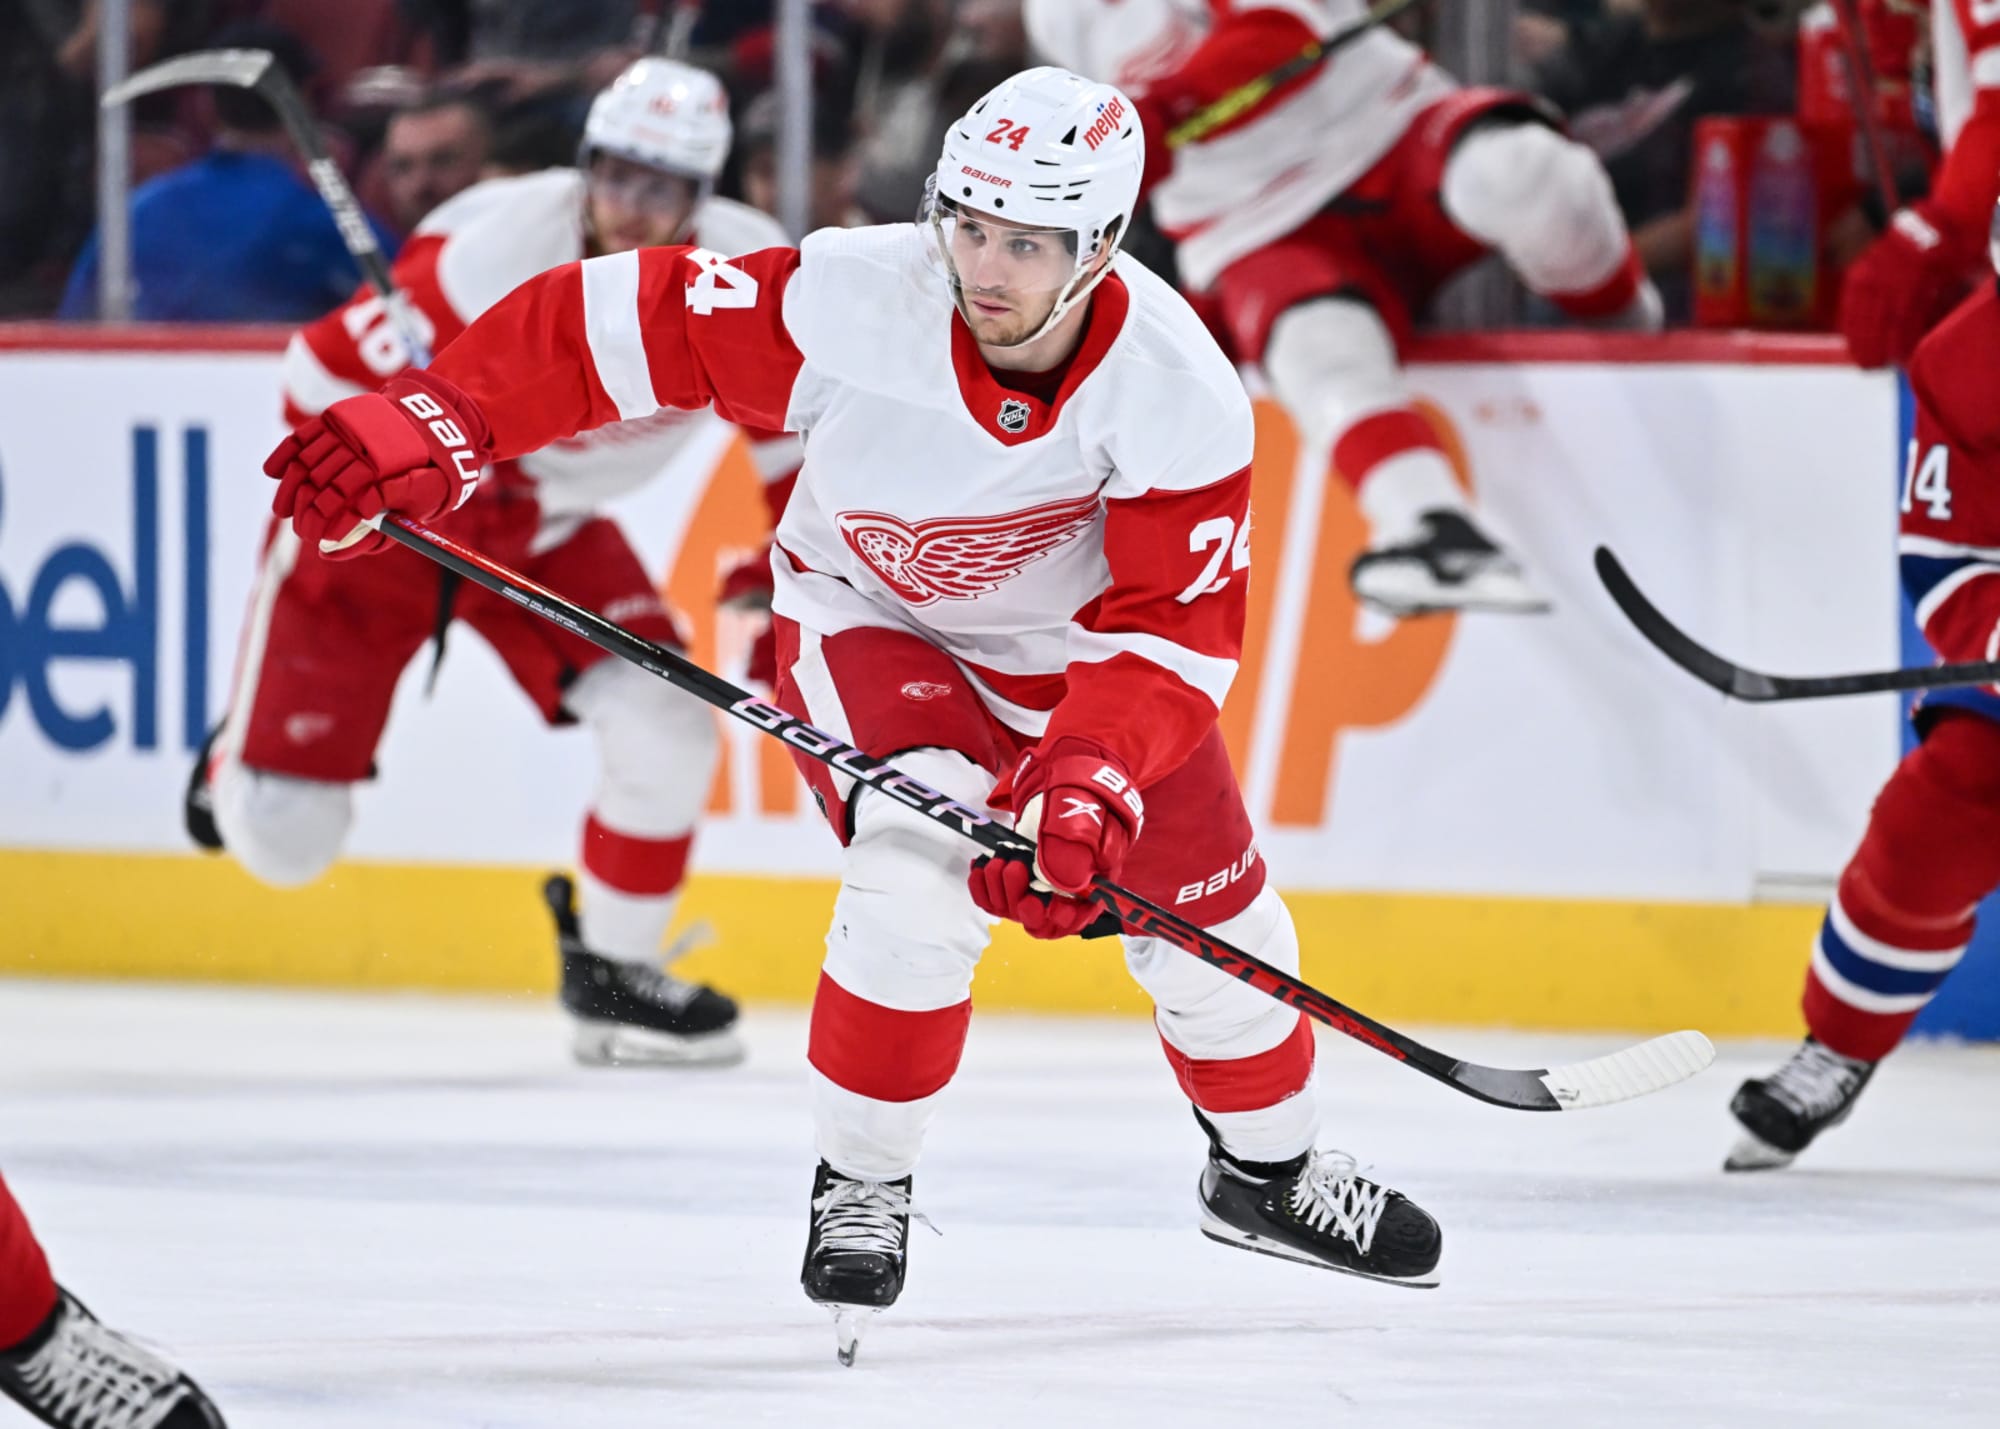 Detroit Red Wings: 4 pending UFA's to consider re-signing this offseason